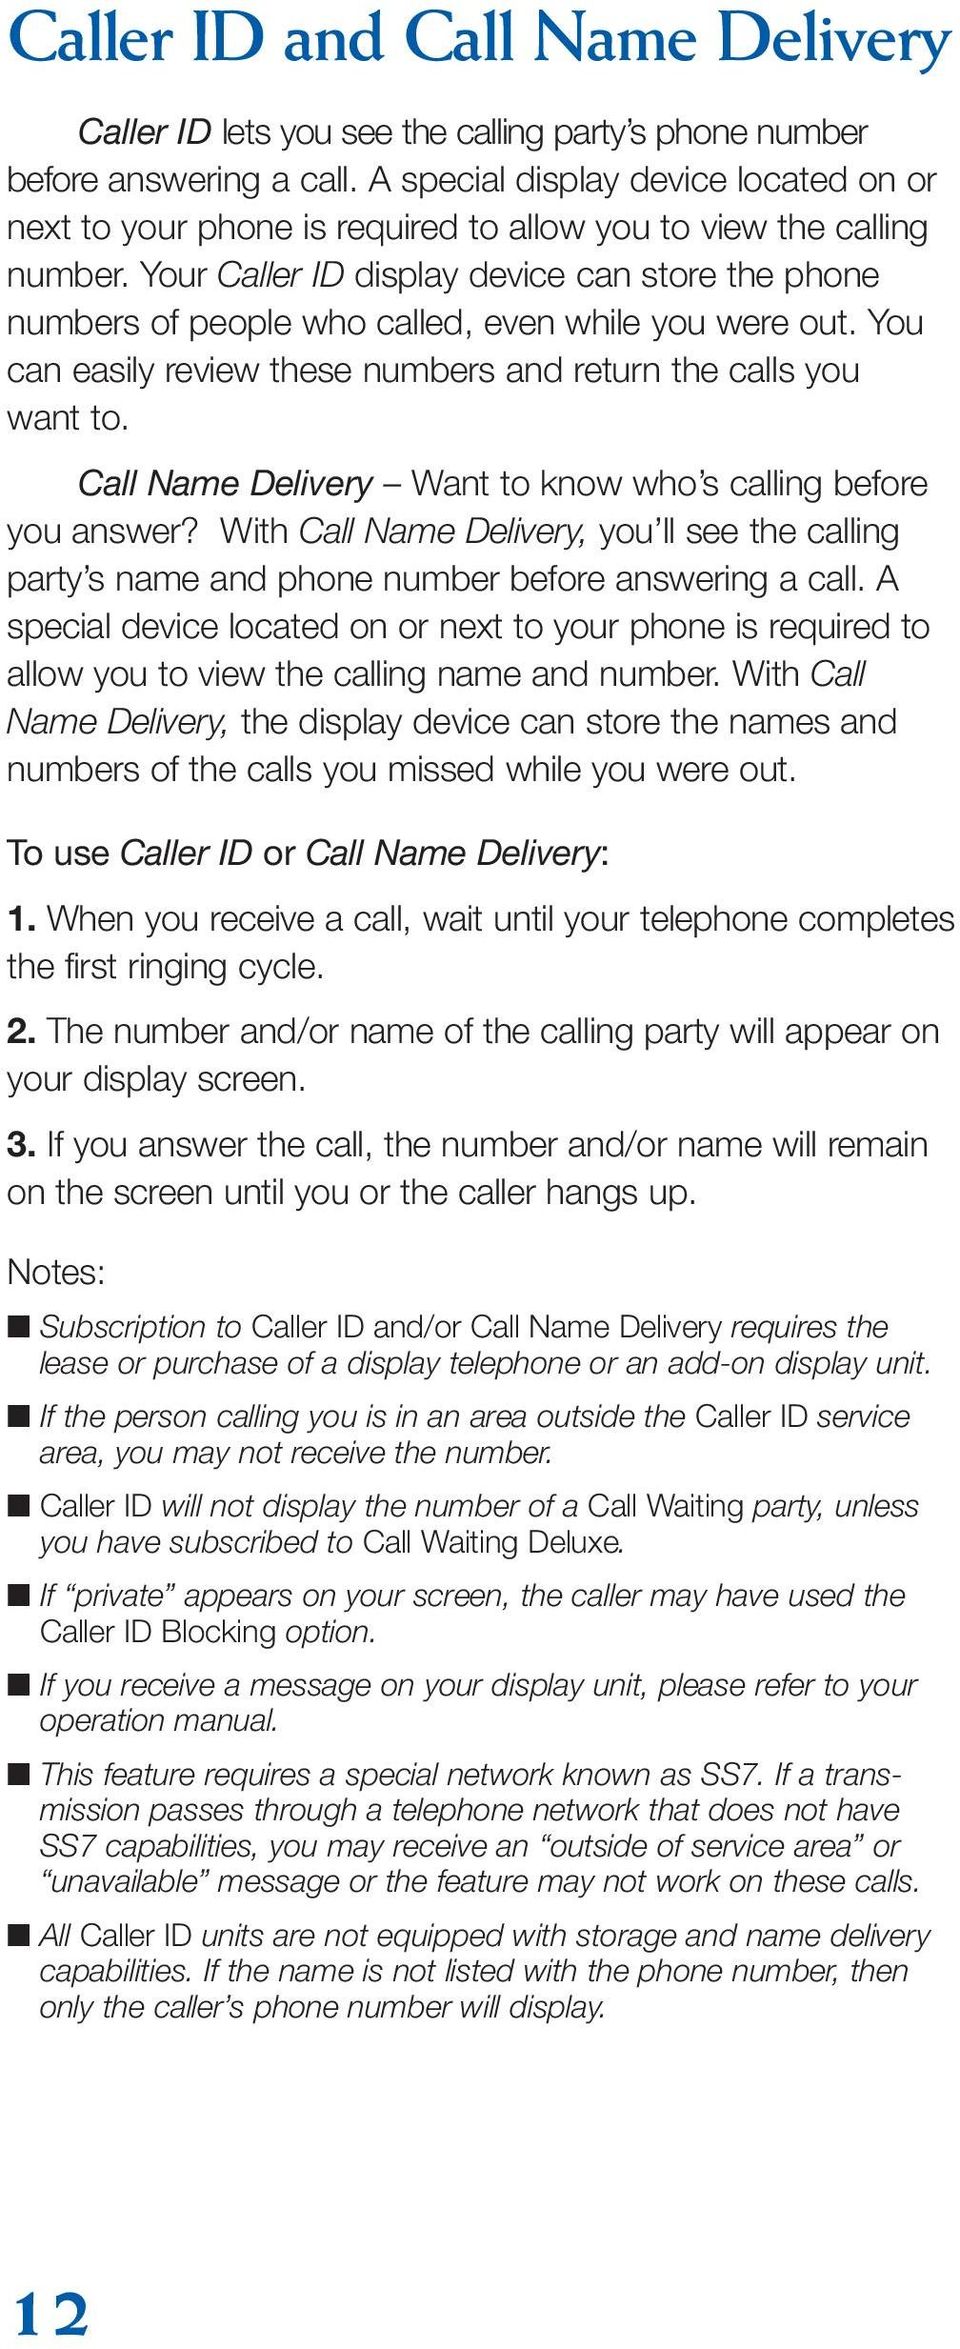 Your Caller ID display device can store the phone numbers of people who called, even while you were out. You can easily review these numbers and return the calls you want to.